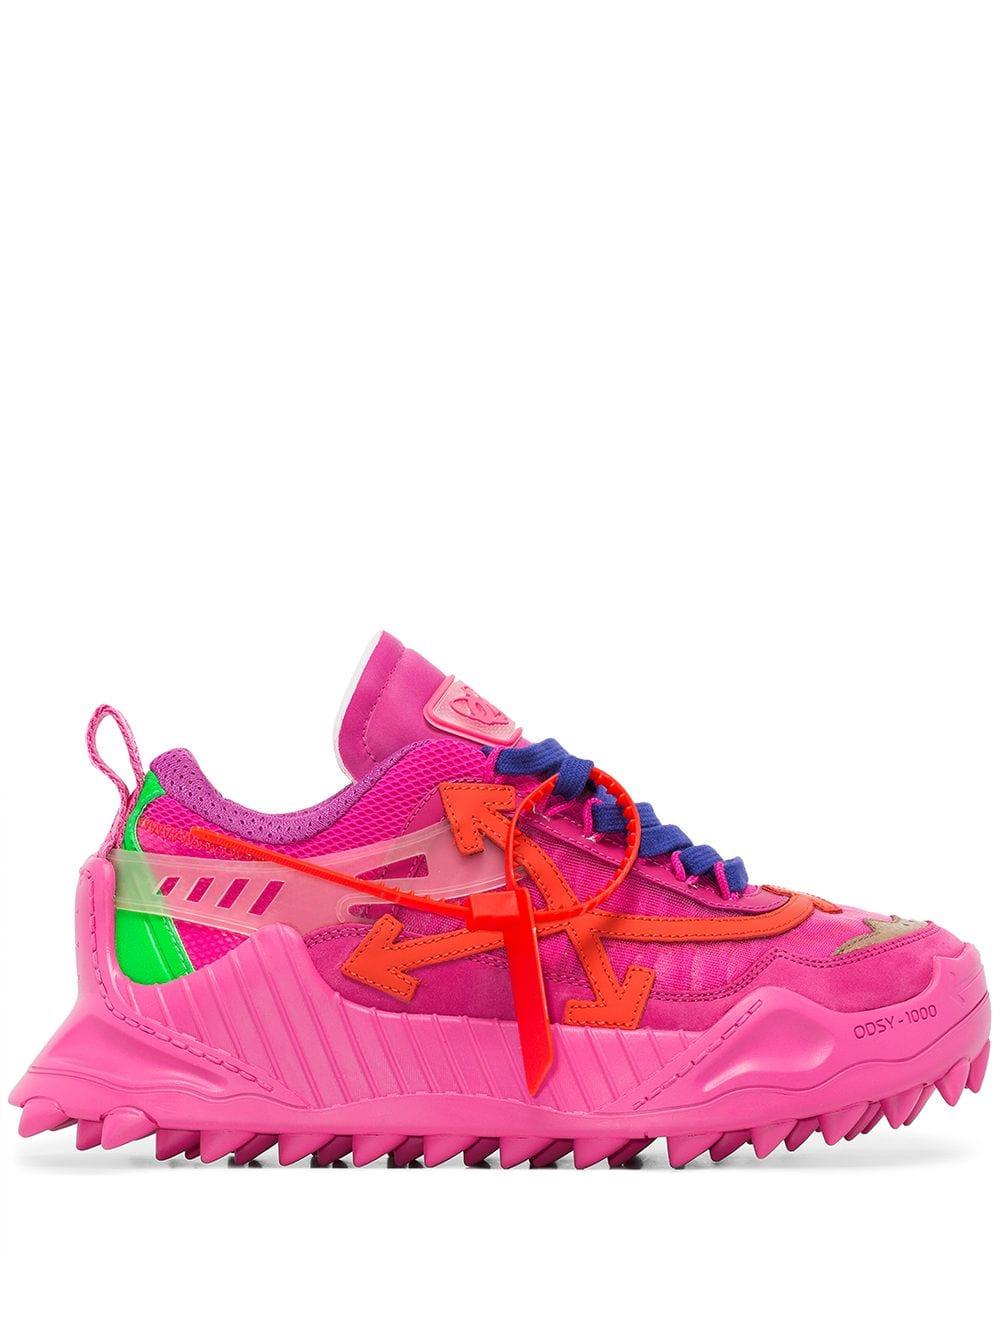 Off-White c/o Virgil Abloh Pink Odsy 1000 Ridged Soles Sneakers | Lyst